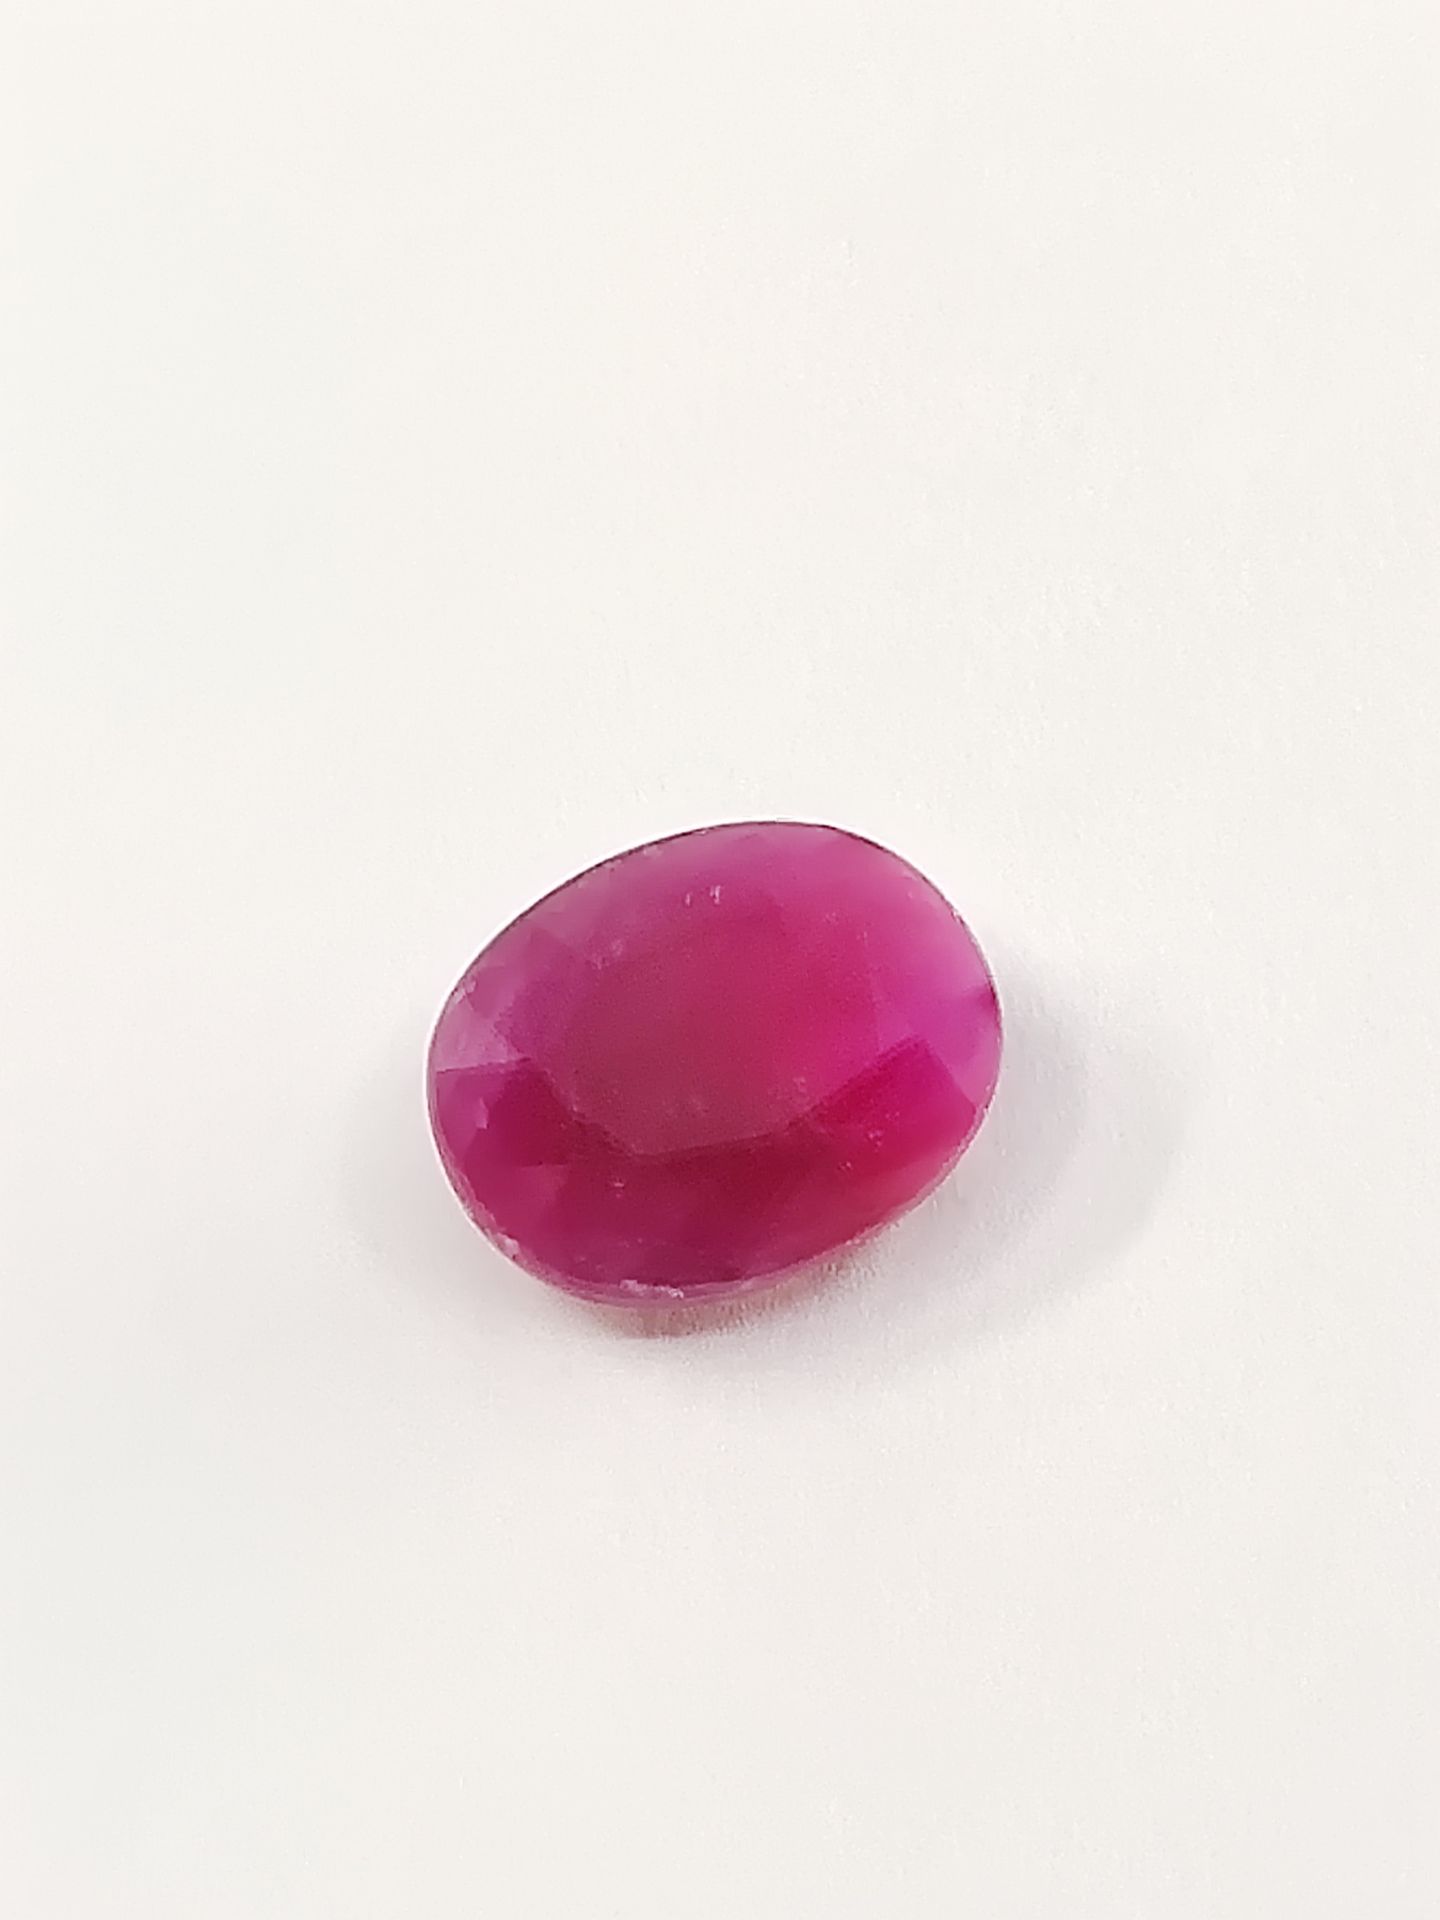 Null Oval red RUBY, Madagascar, 6.94 carats


Dim : 12,5 x 10